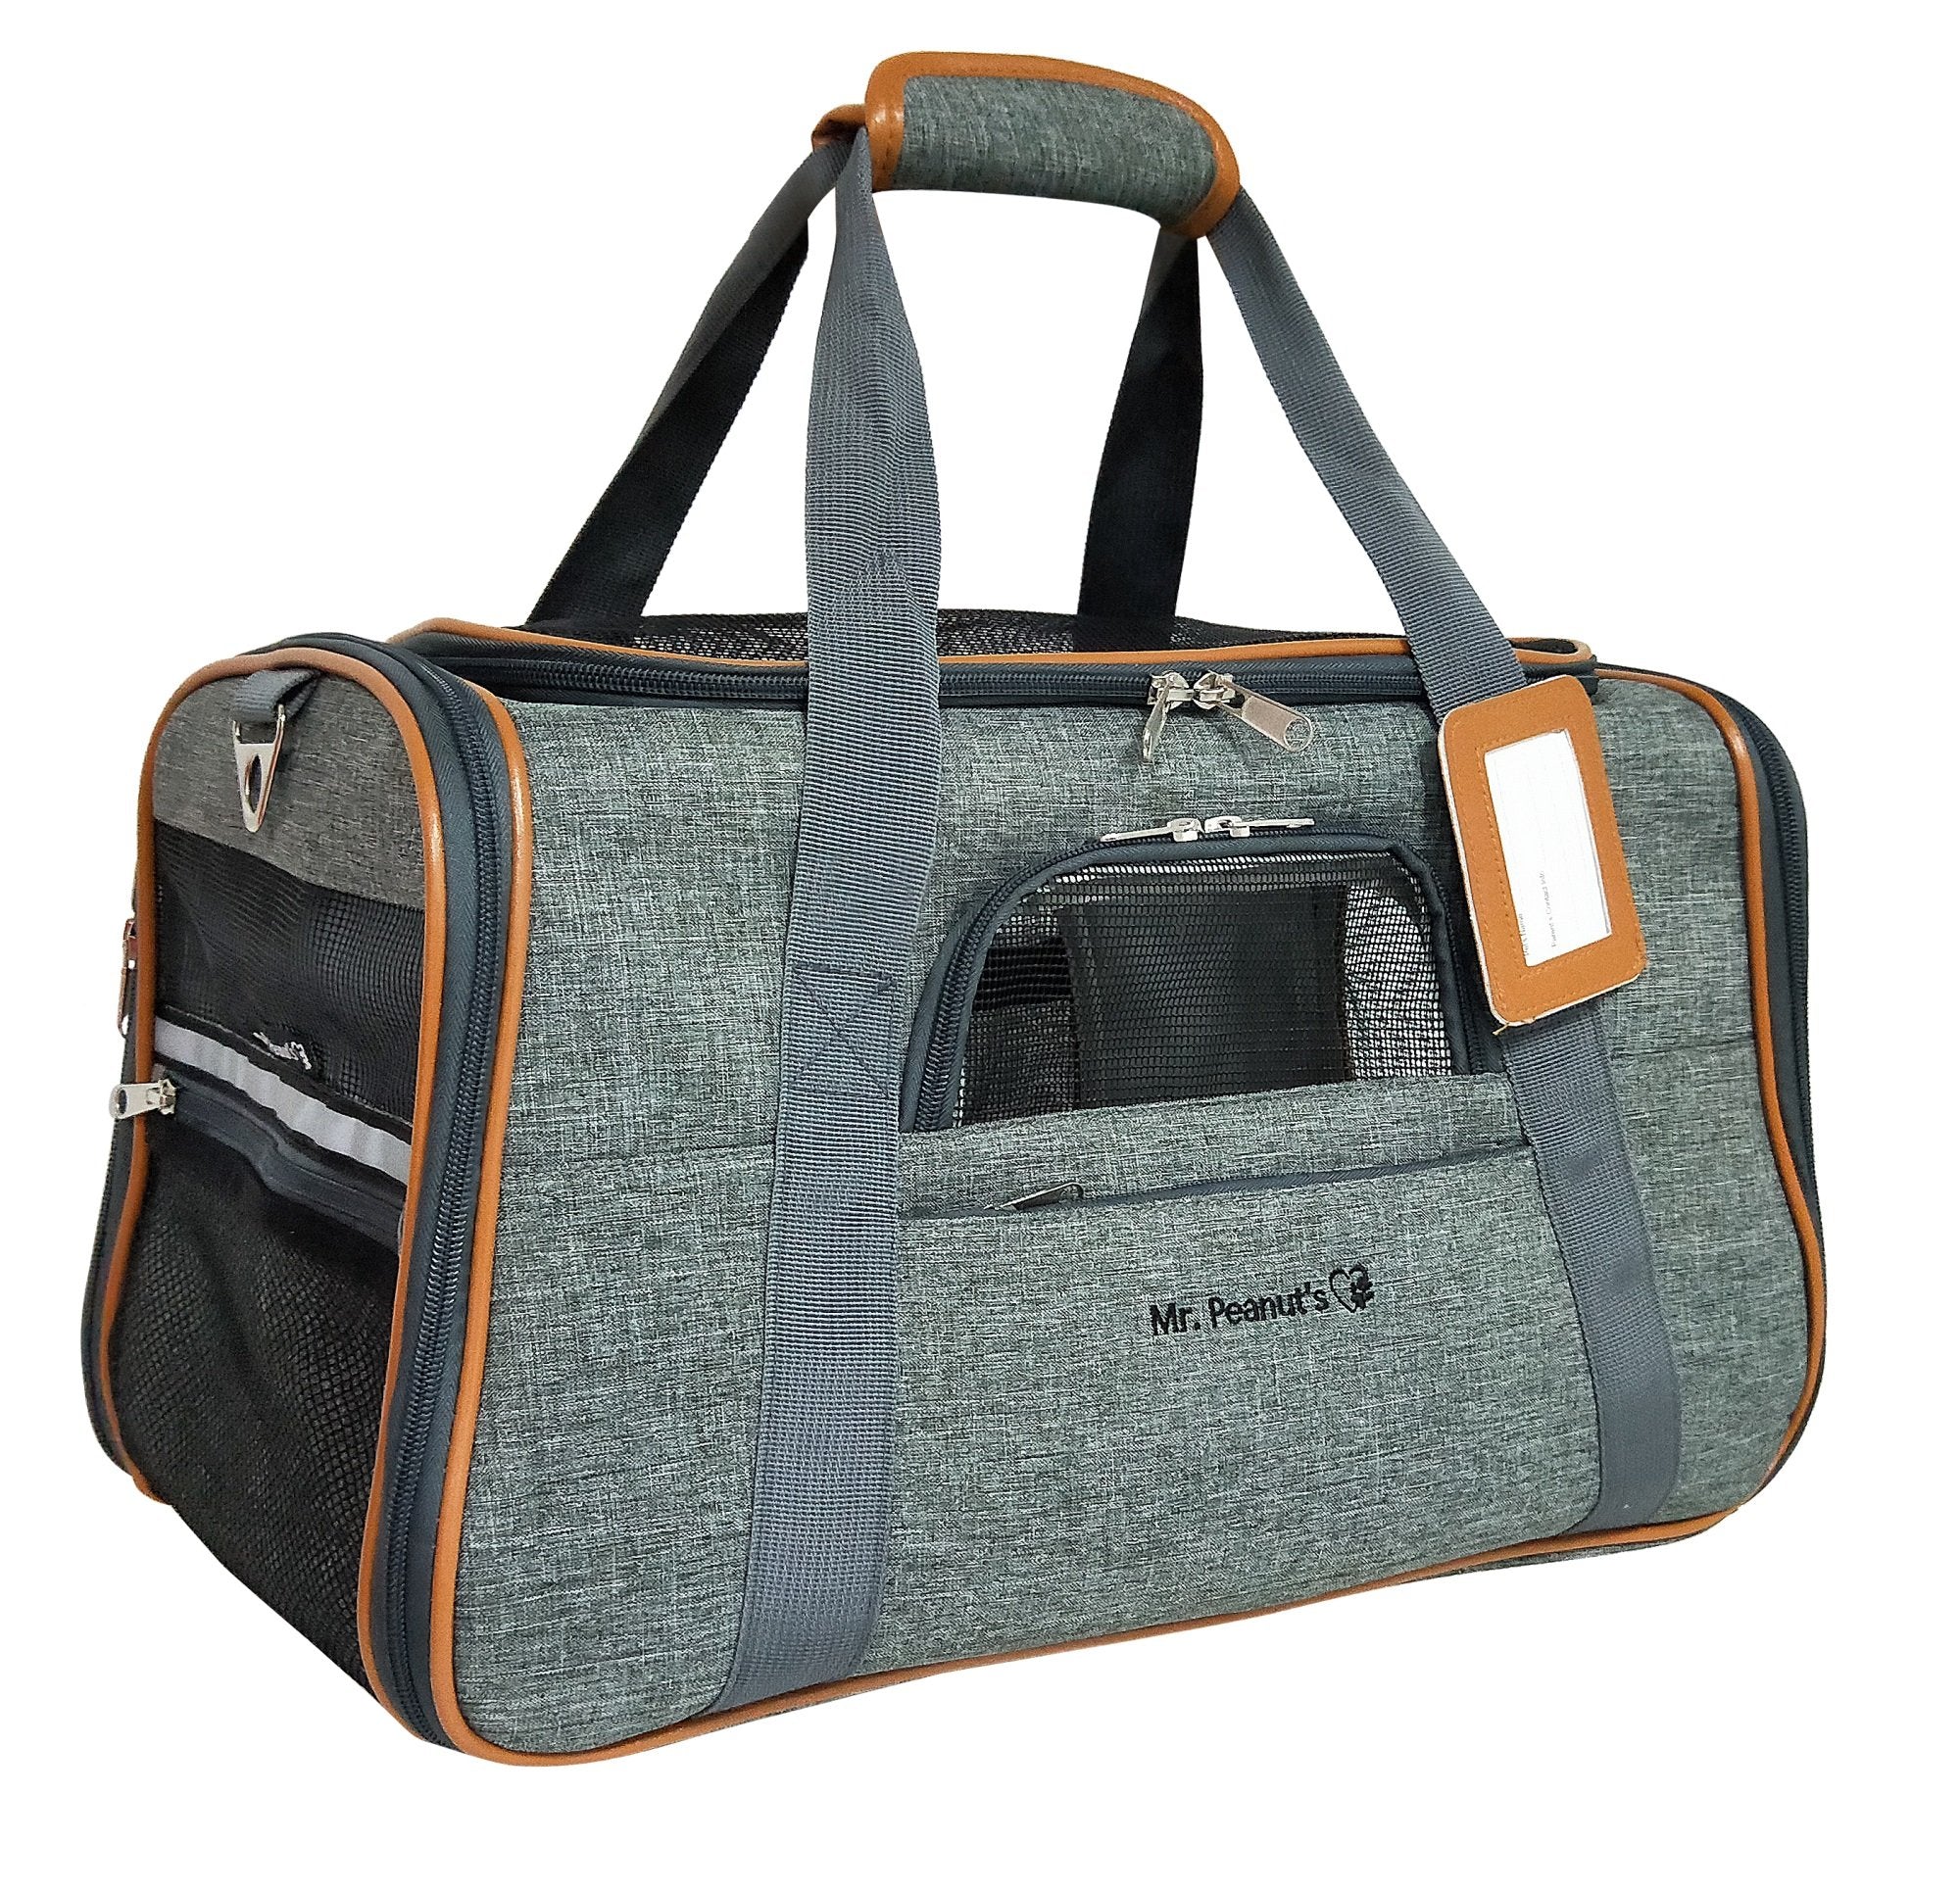 Airline Approved Pet Carrier - Soft-Sided Carriers for Small